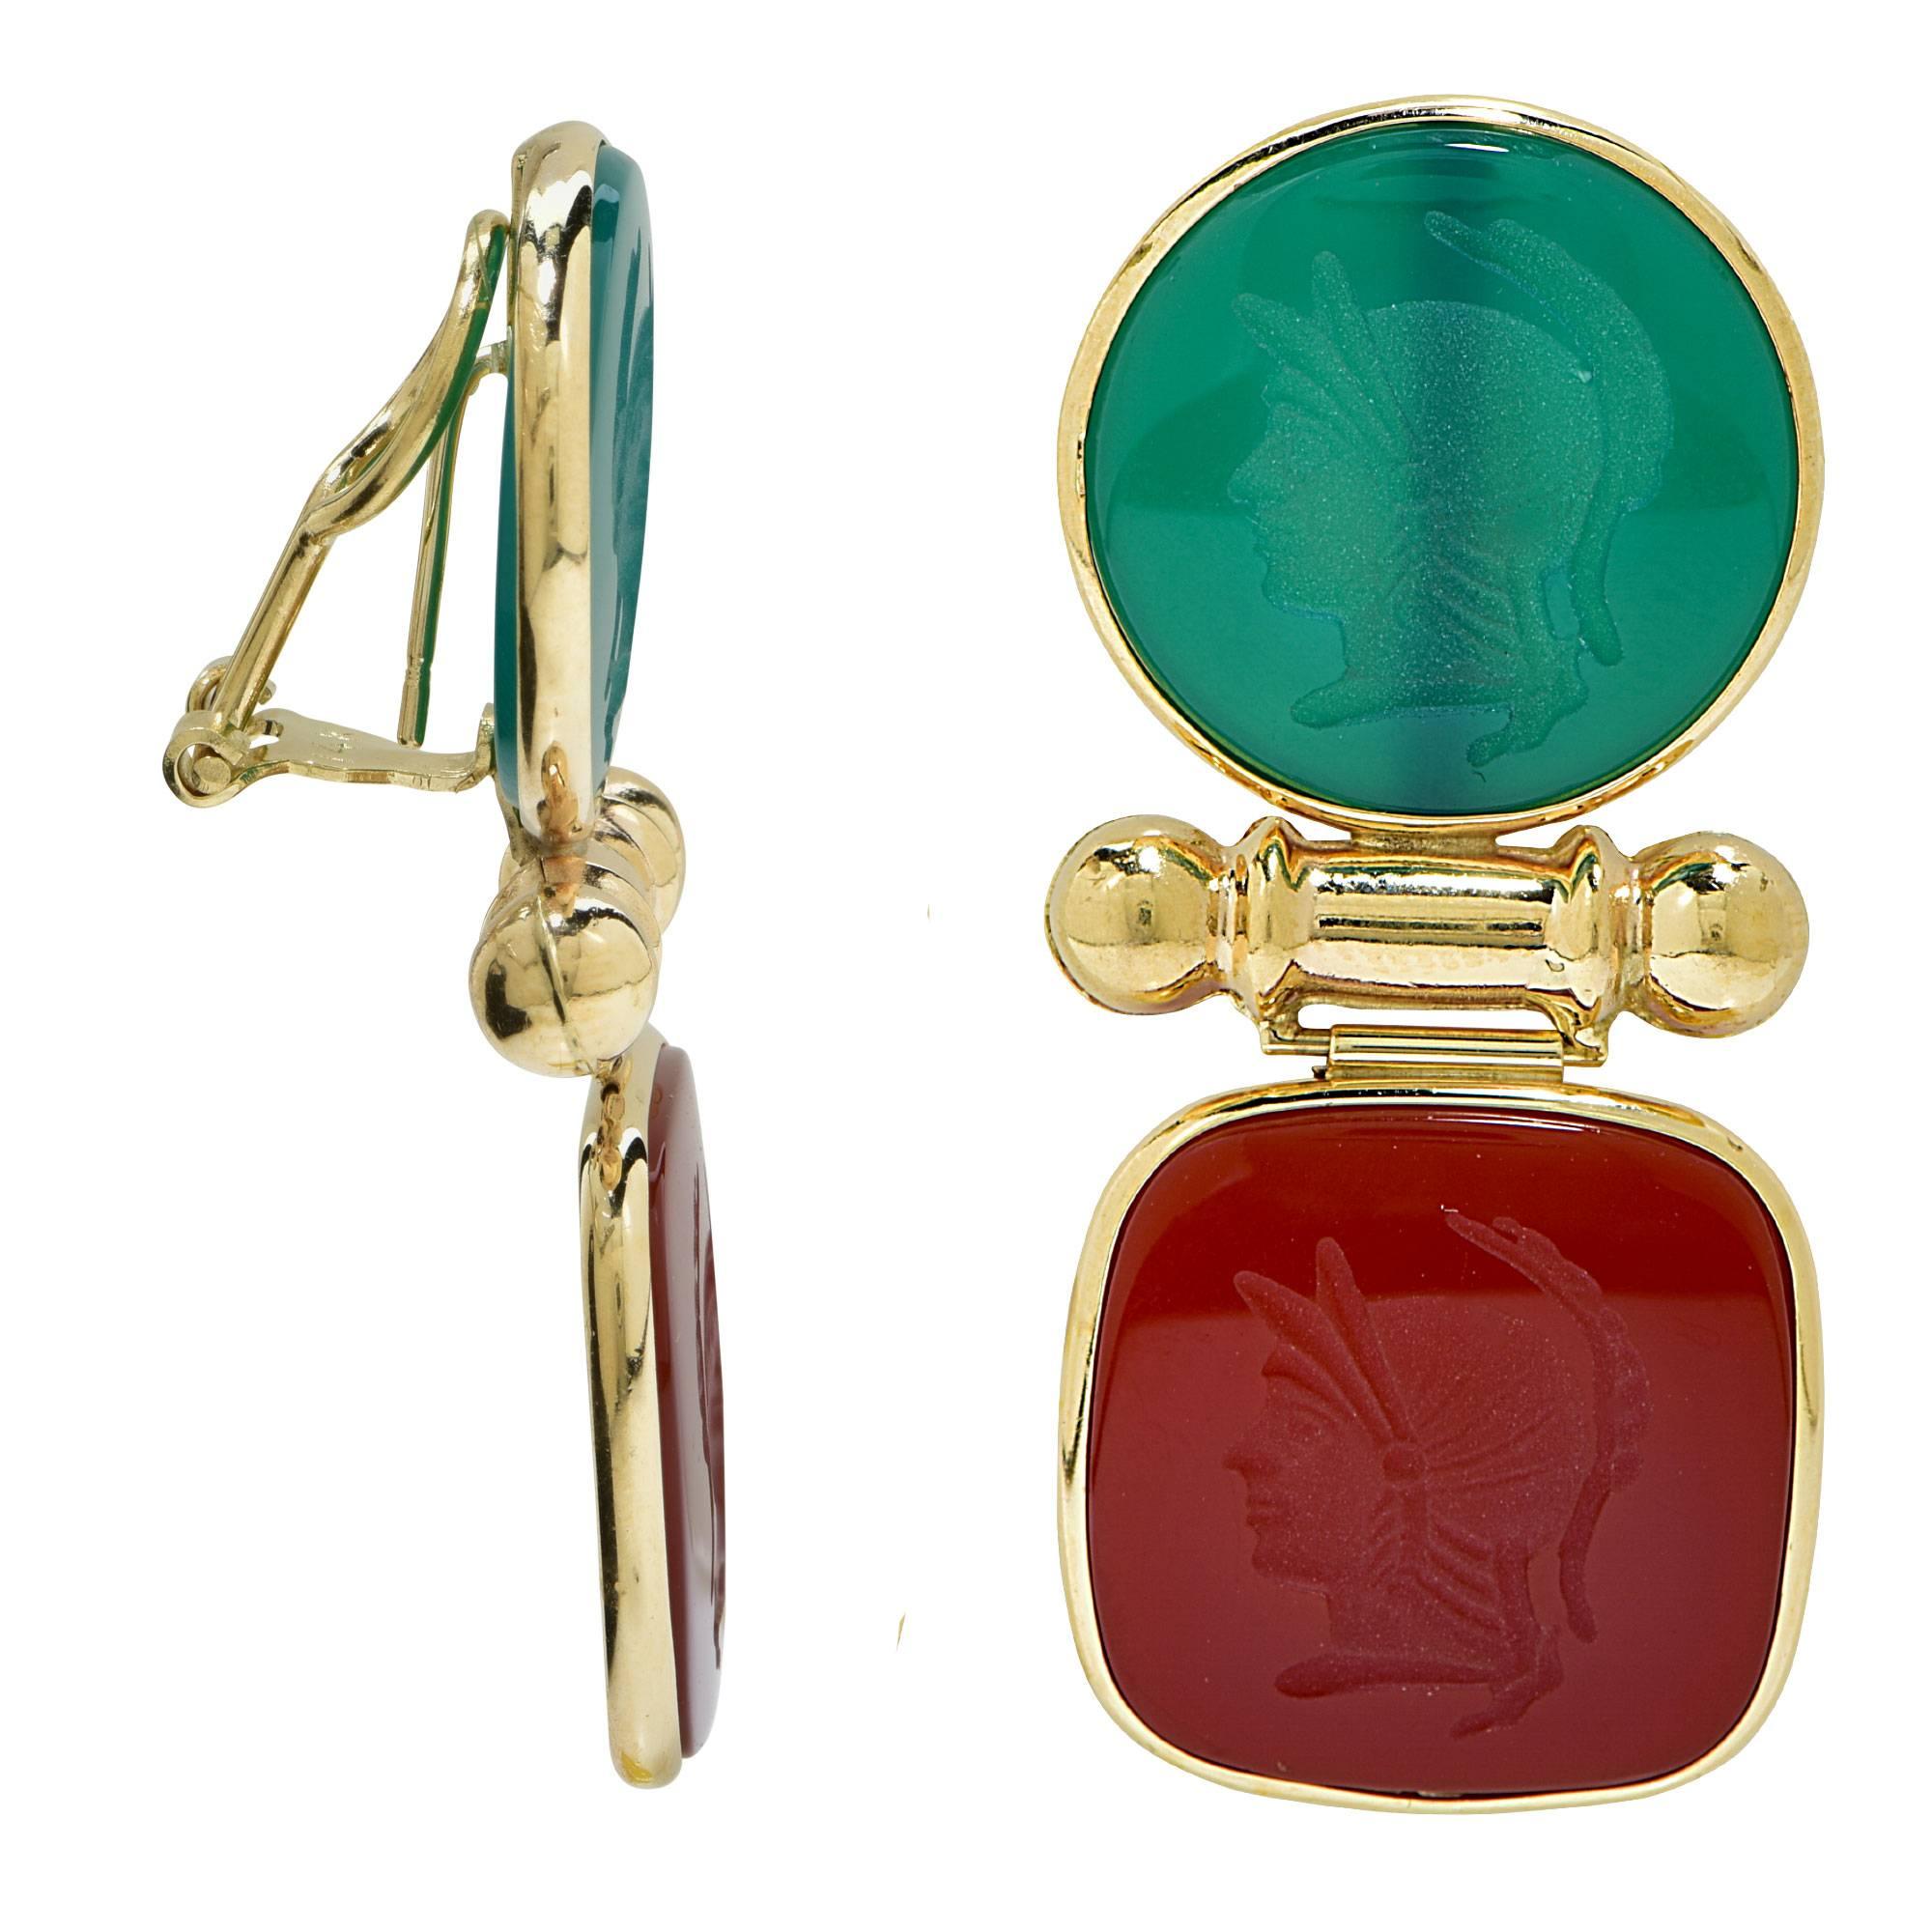 14k yellow gold Green Onyx and Carnelian Intaglio Earrings.

Metal weight: 12.12 grams

These earrings are accompanied by a retail appraisal performed by a GIA Graduate Gemologist.